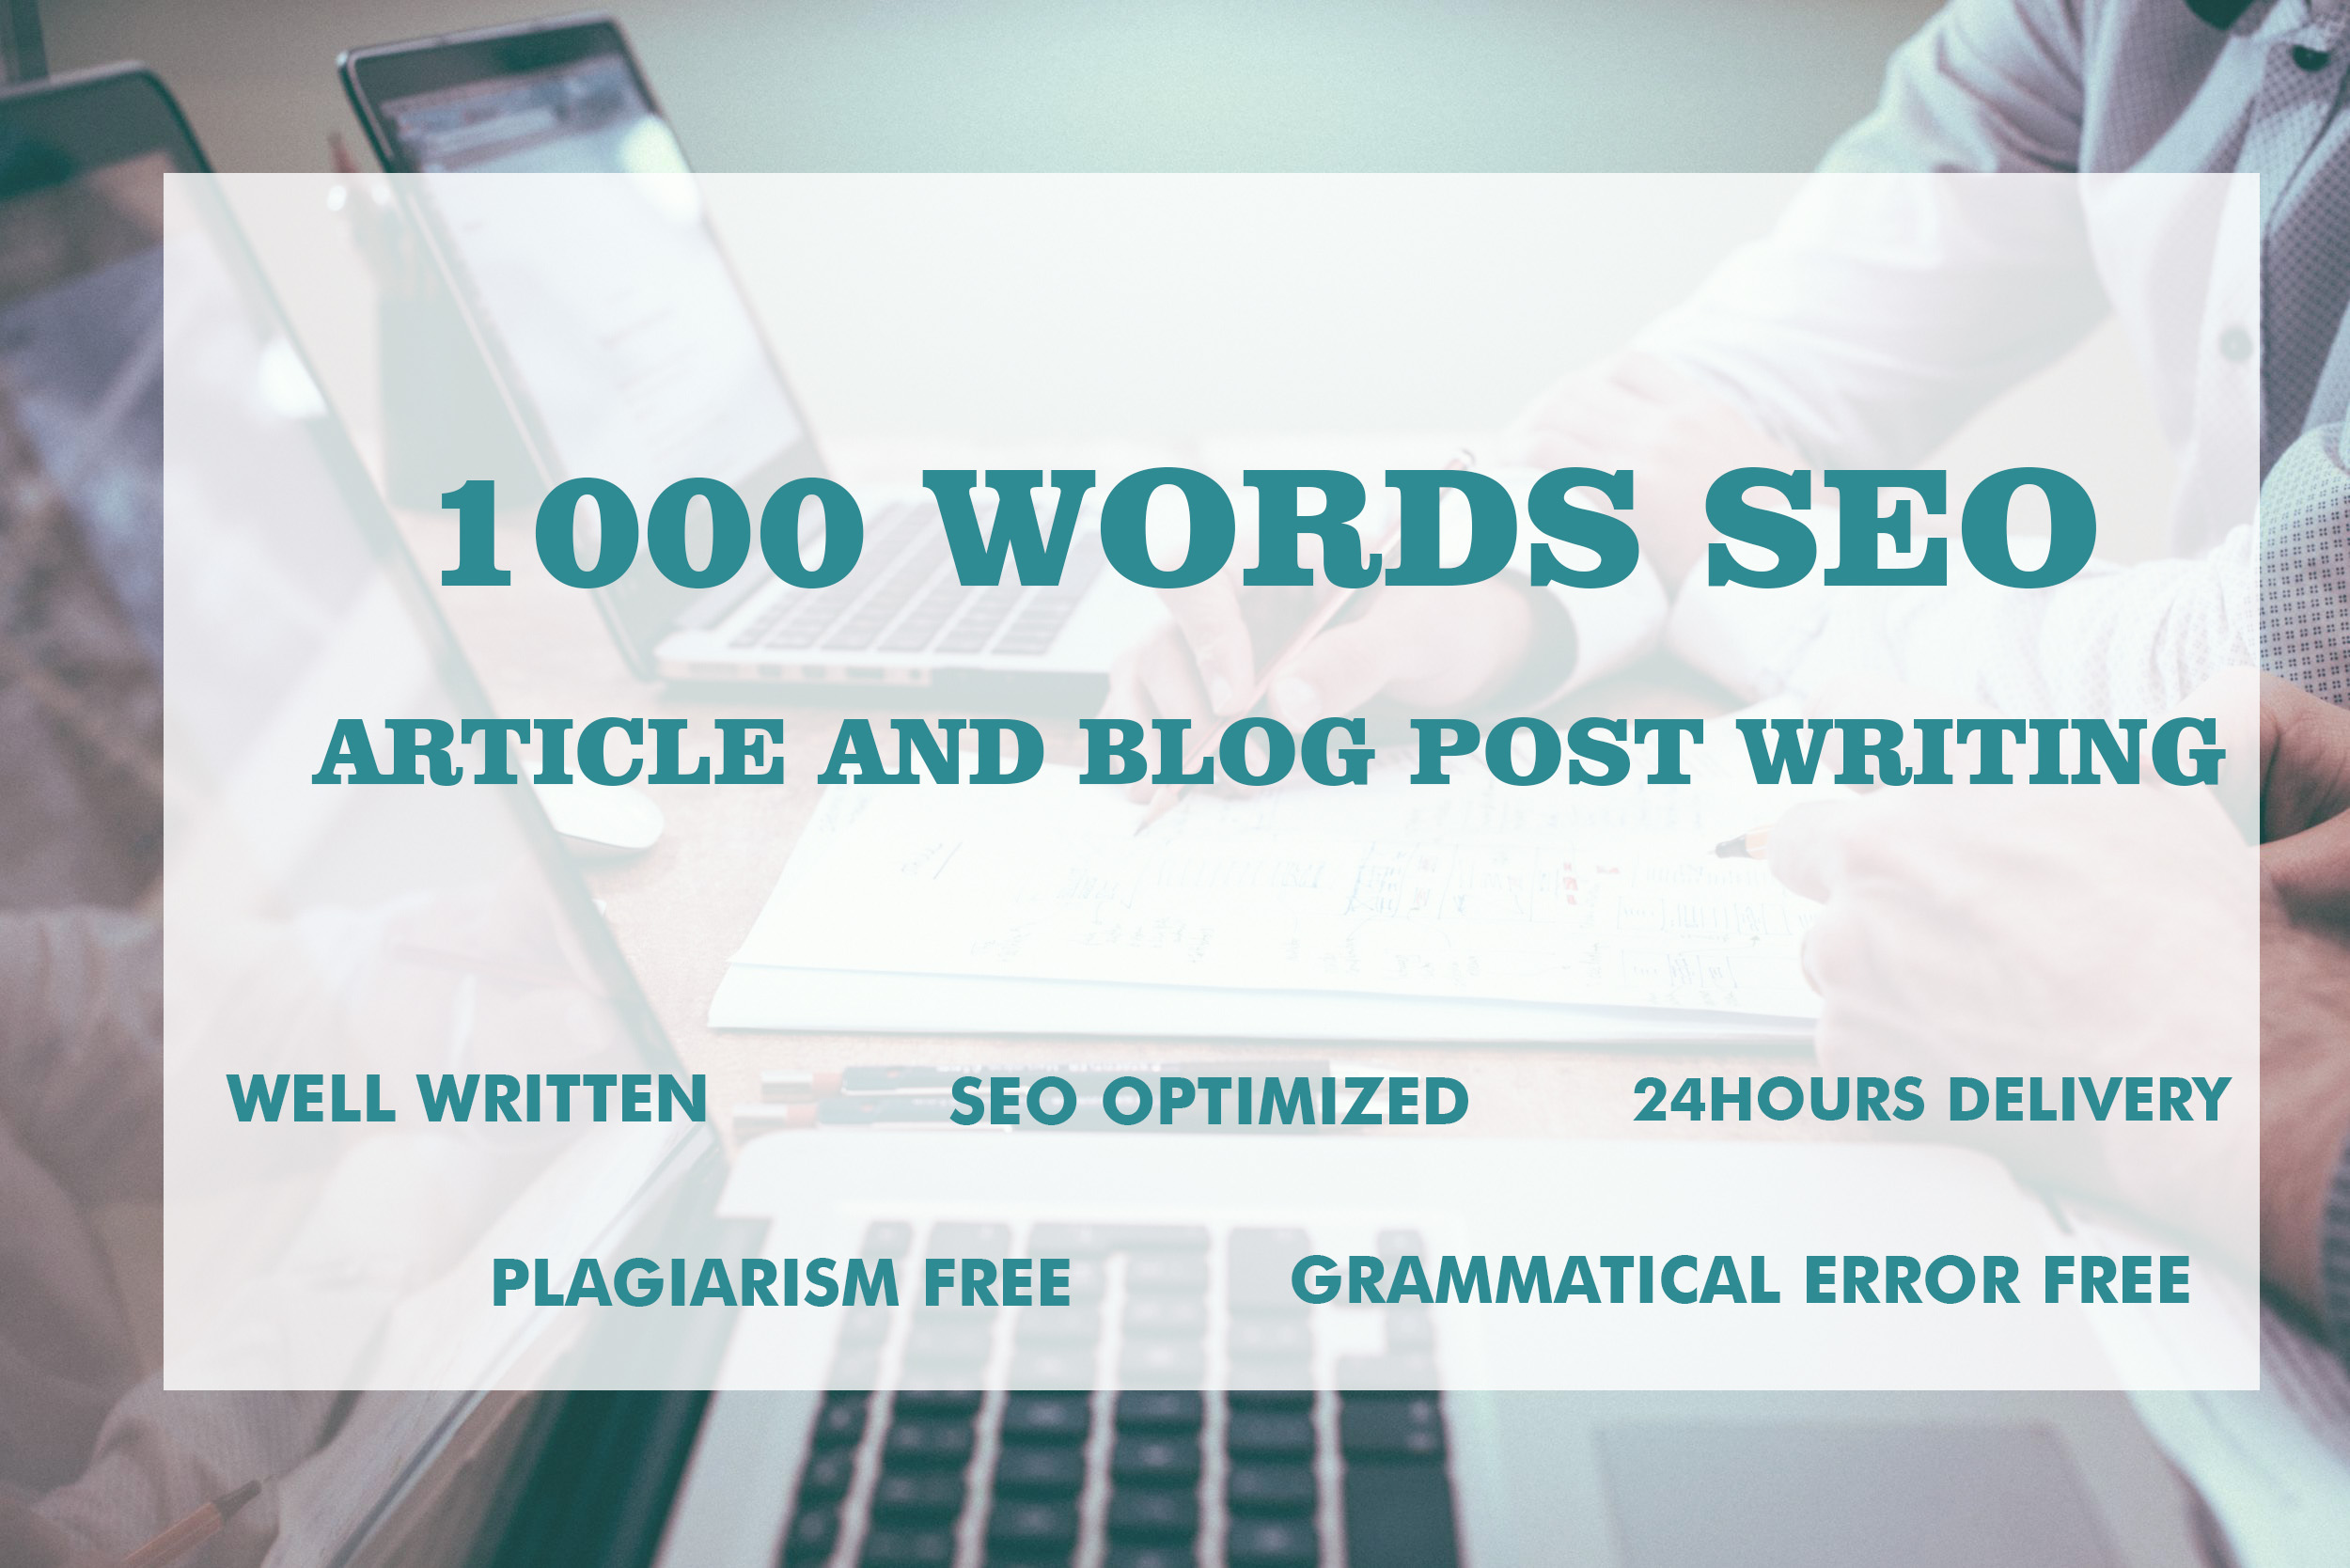 I will do 1000 words SEO article writing, blog posts and website content